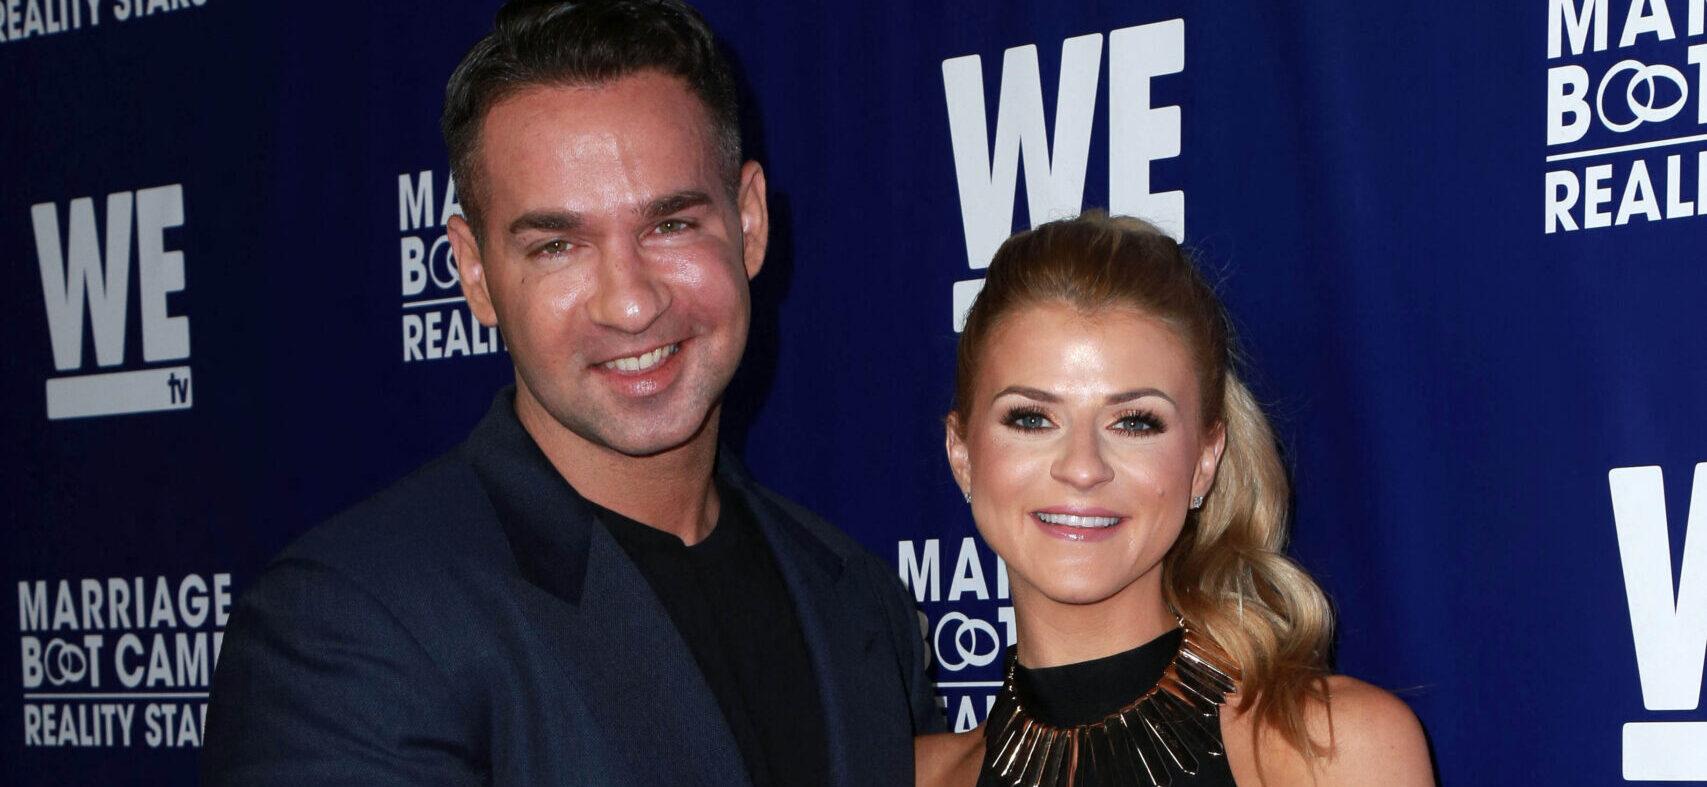 Good Things Come In Threes At Mike ‘The Situation’ Sorrentino’s Household!